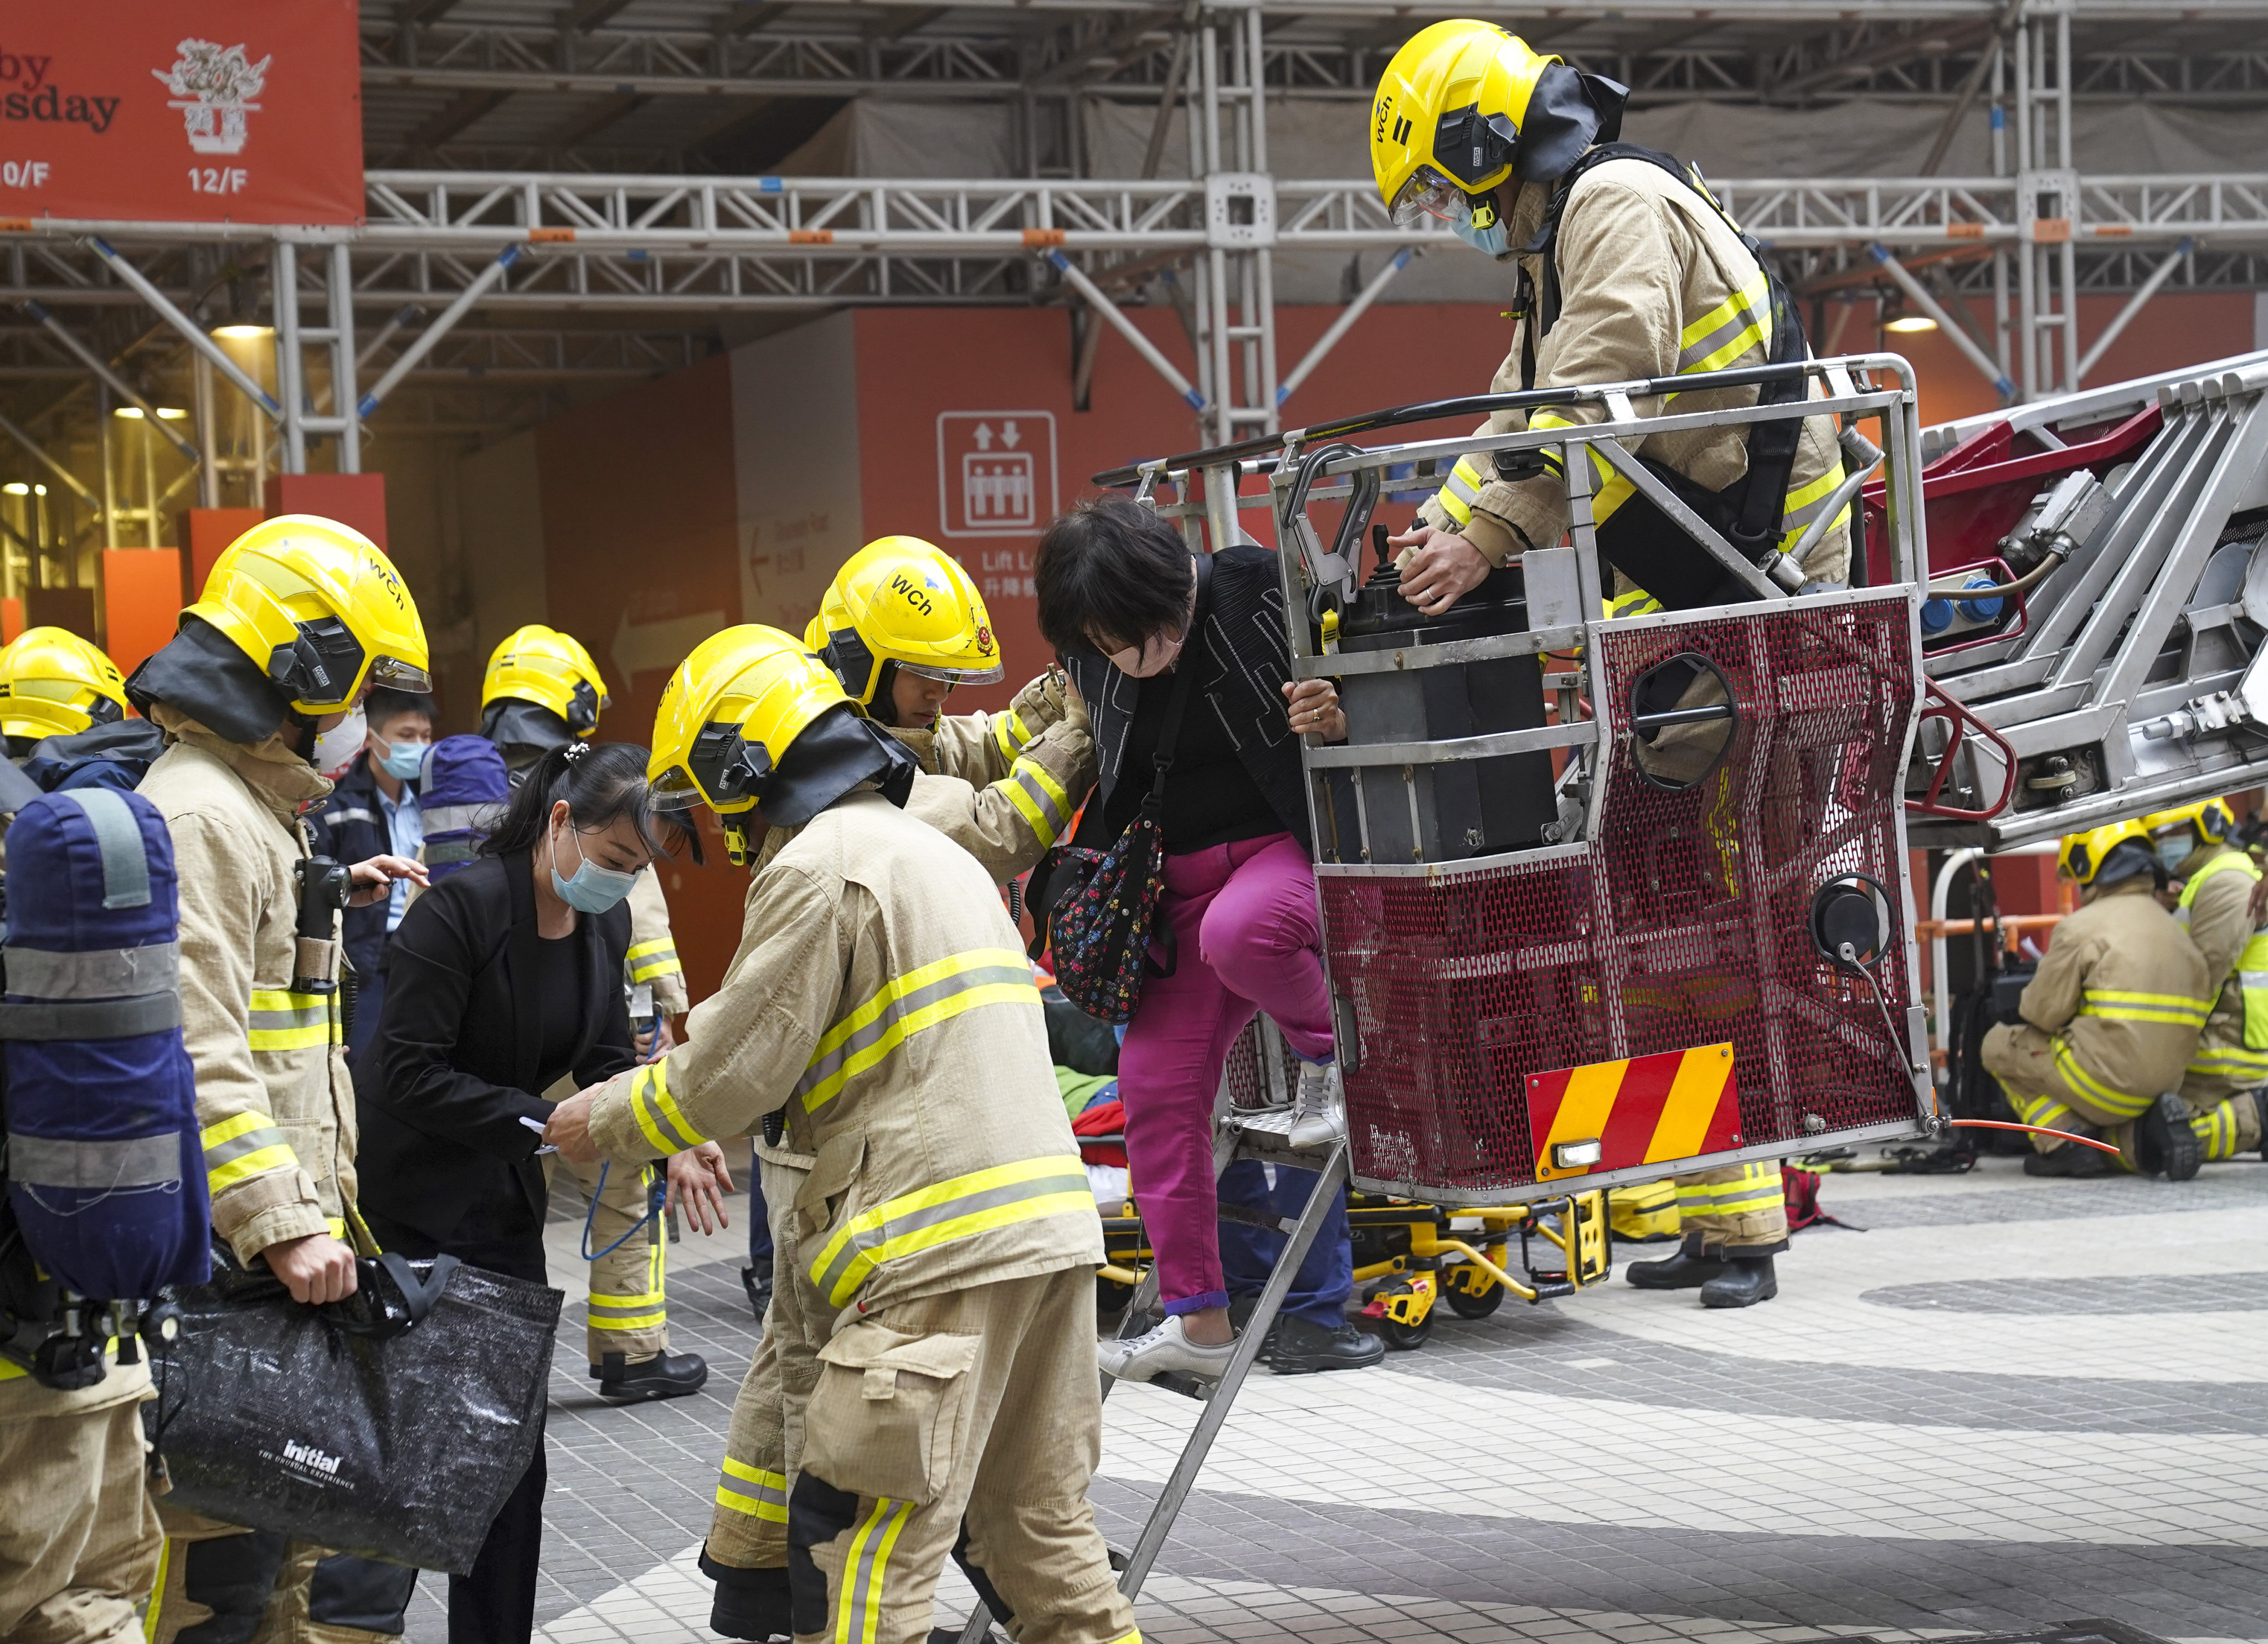 Firefighters help people to safety after the World Trade Centre in Causeway Bay caught fire on Wednesday. Photo: Sam Tsang